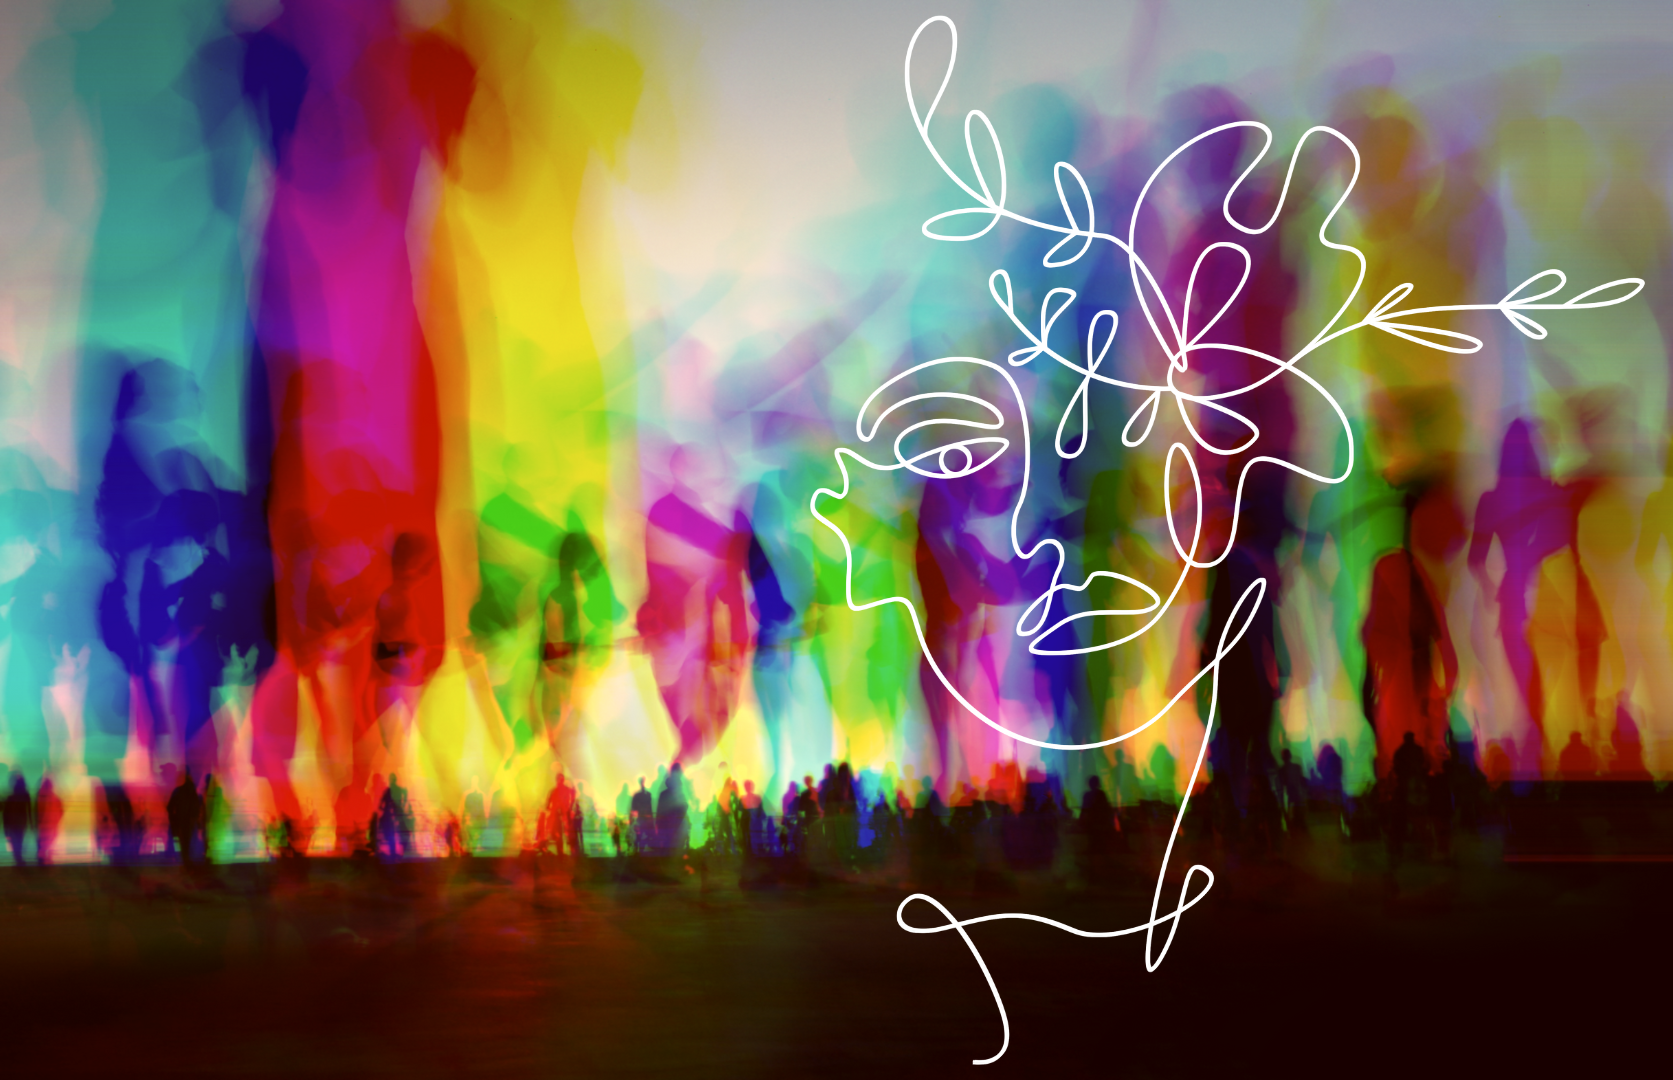 An colorful abstract painterly image of human silhouettes with a white line drawing of a face with natural elements